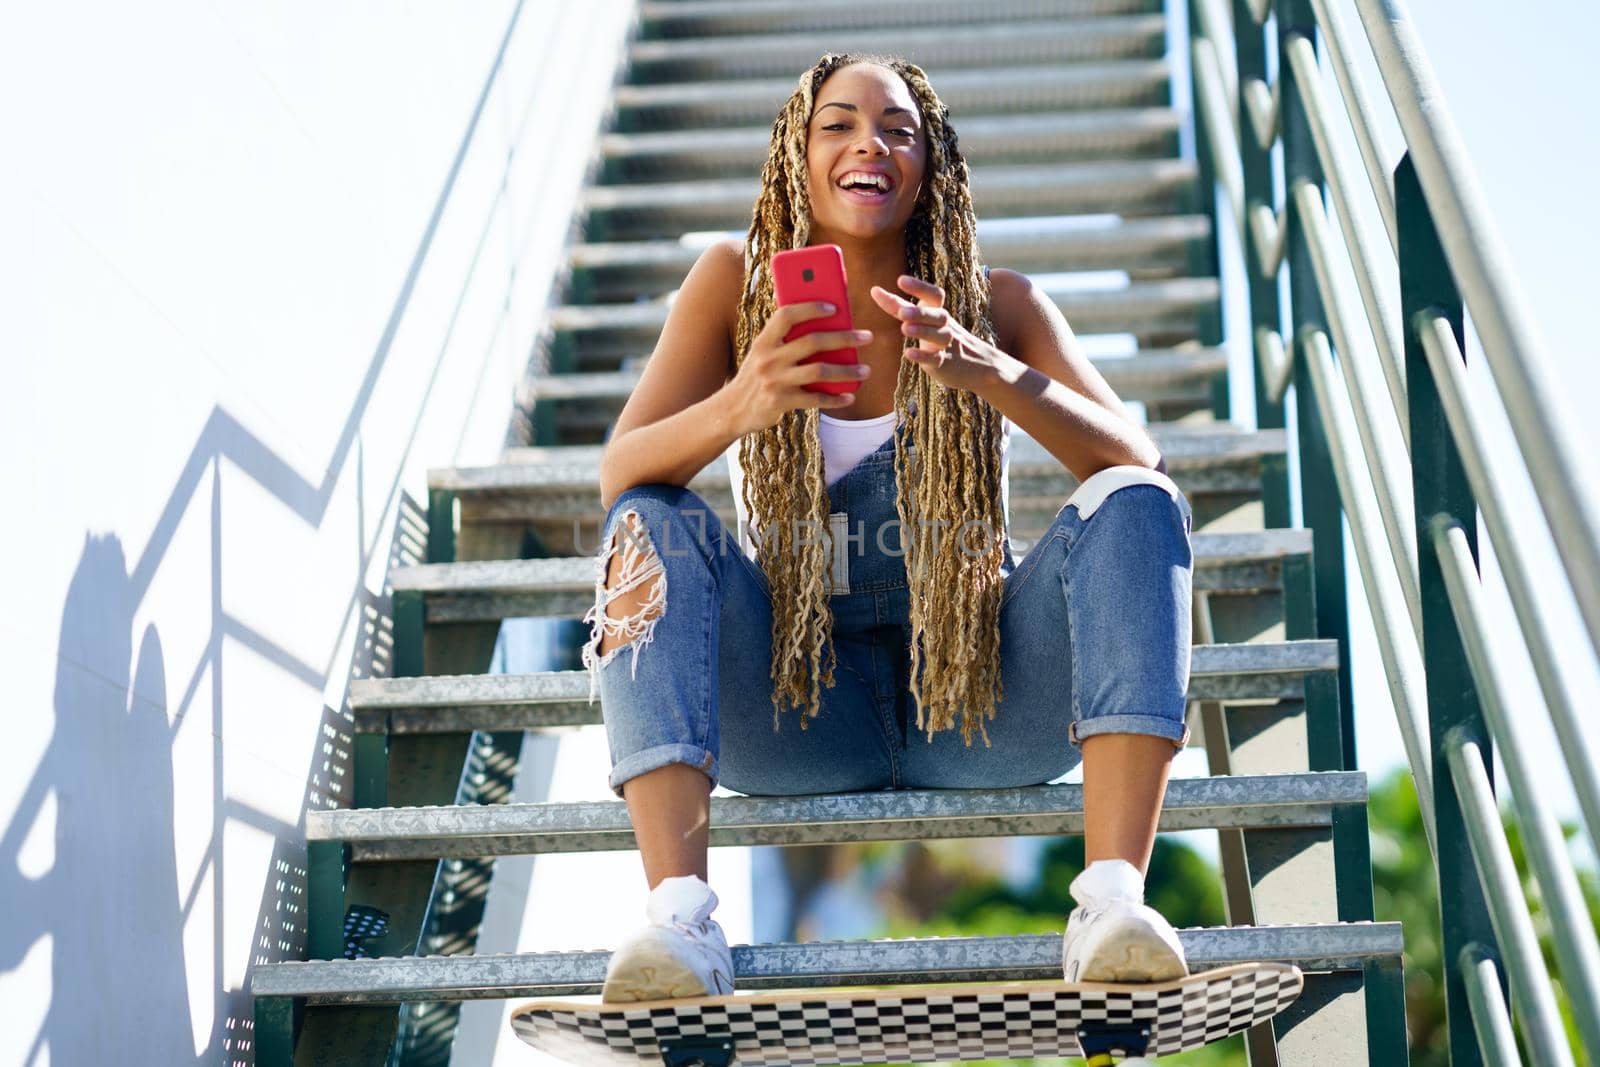 Black girl with coloured braids, sitting on some steps with a smartphone and a skateboard.